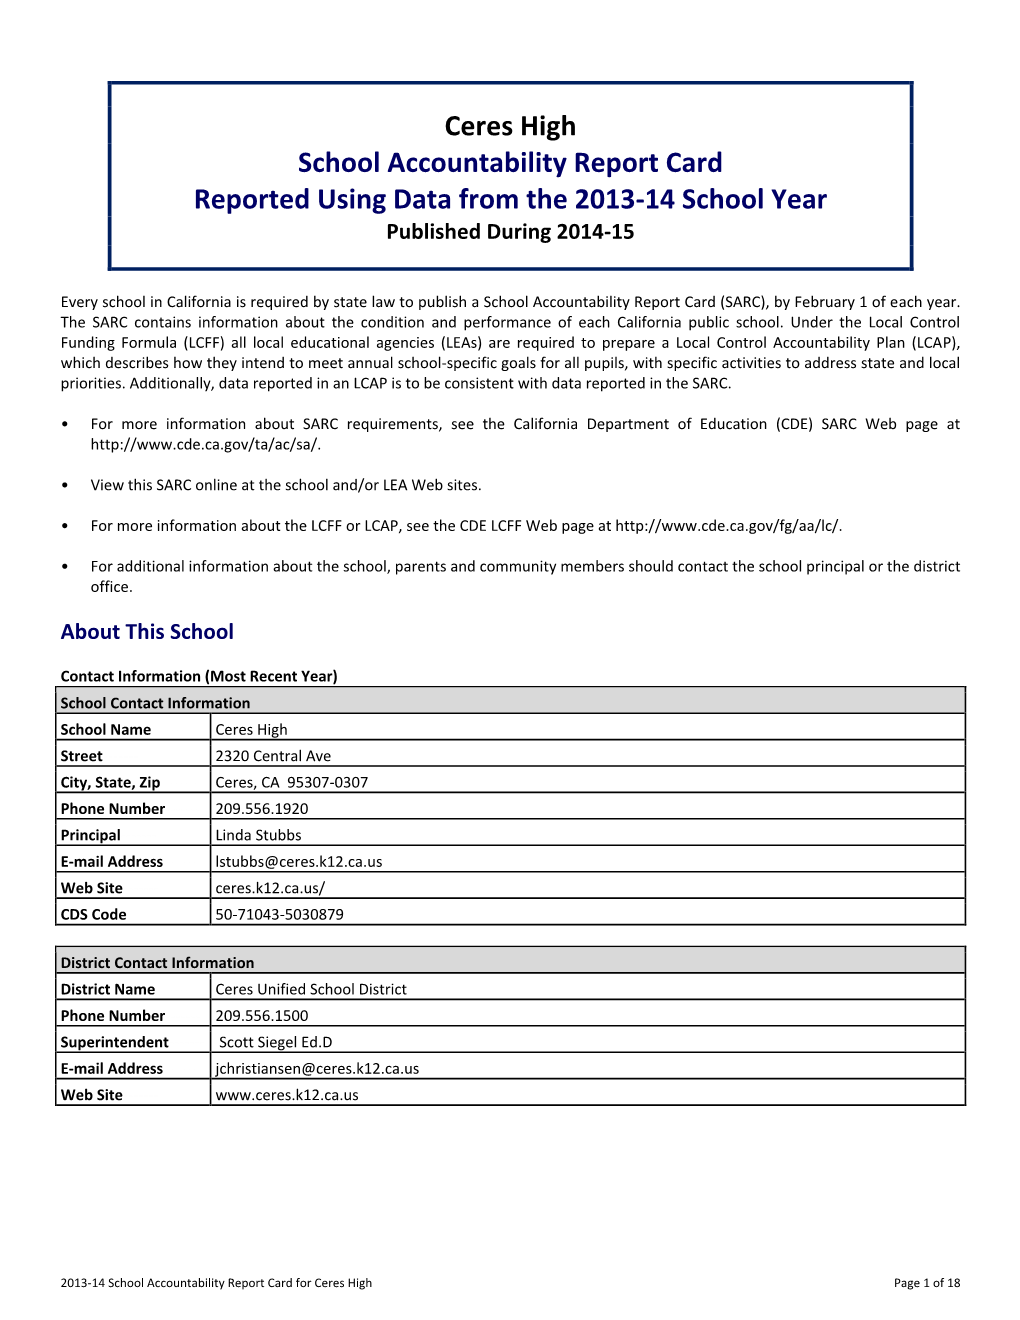 Ceres High School Accountability Report Card Reported Using Data from the 2013-14 School Year Published During 2014-15